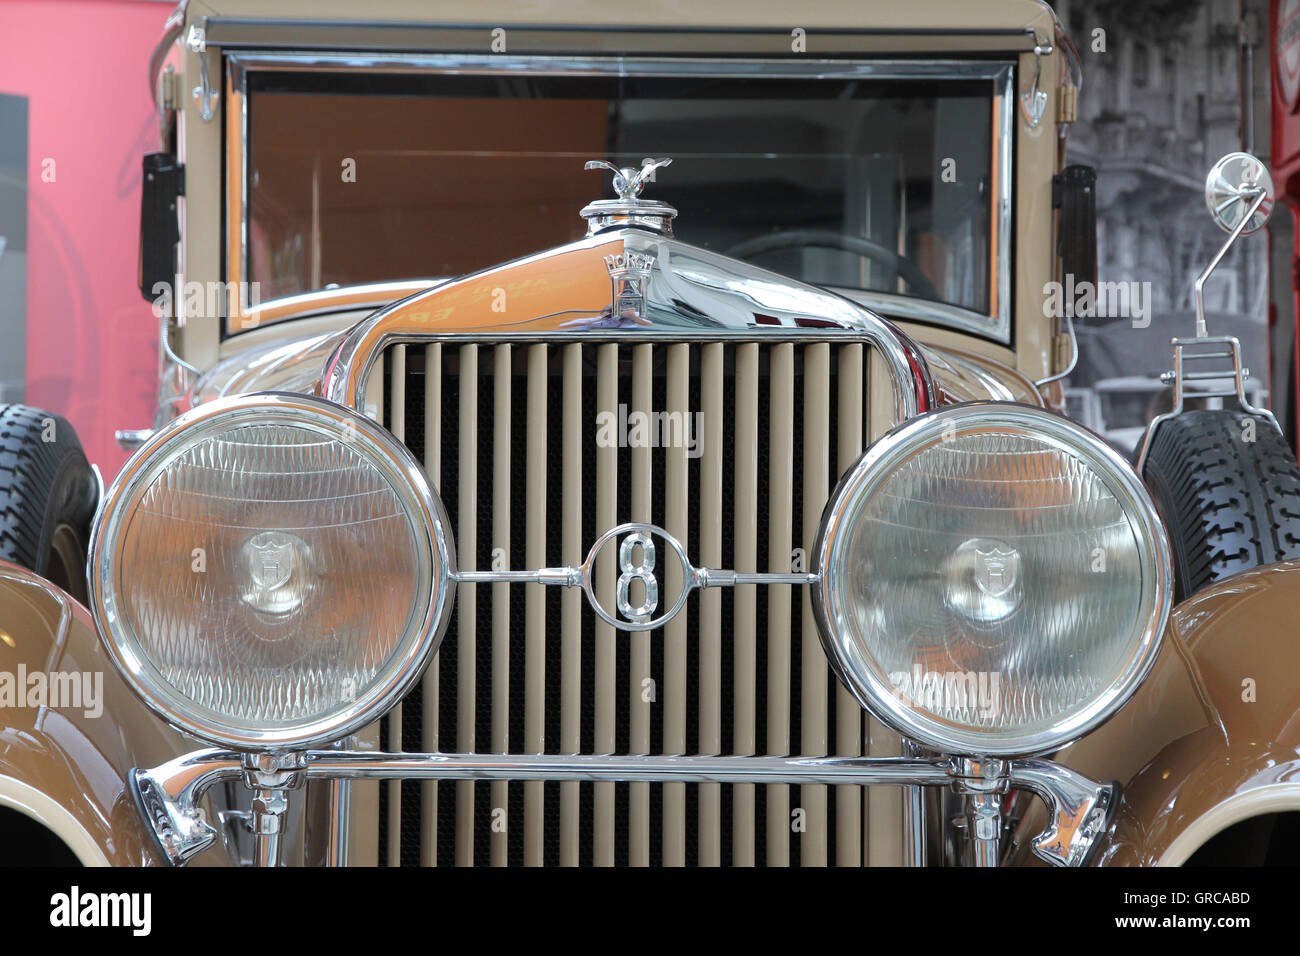 Page 2 - Horch High Resolution Stock Photography and Images - Alamy